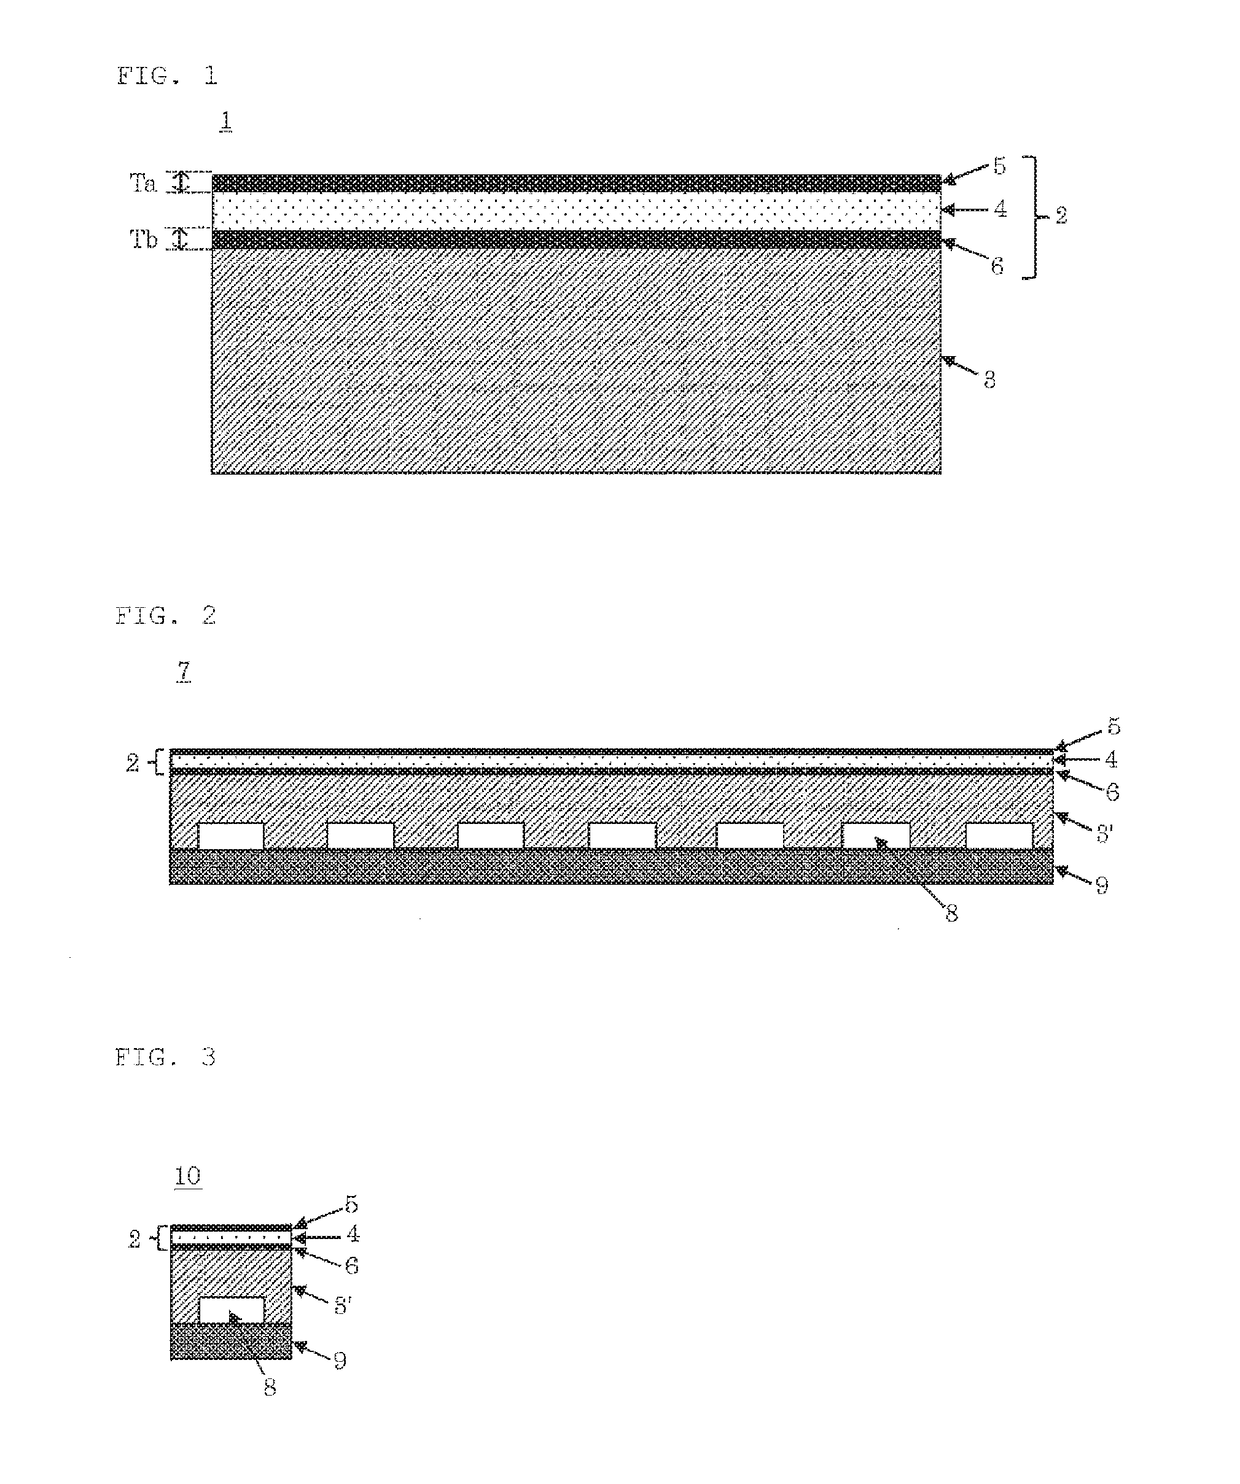 Base-attached encapsulant for semiconductor encapsulation, method for manufacturing base-attached encapsulant for semiconductor encapsulation, and method for manufacturing semiconductor apparatus